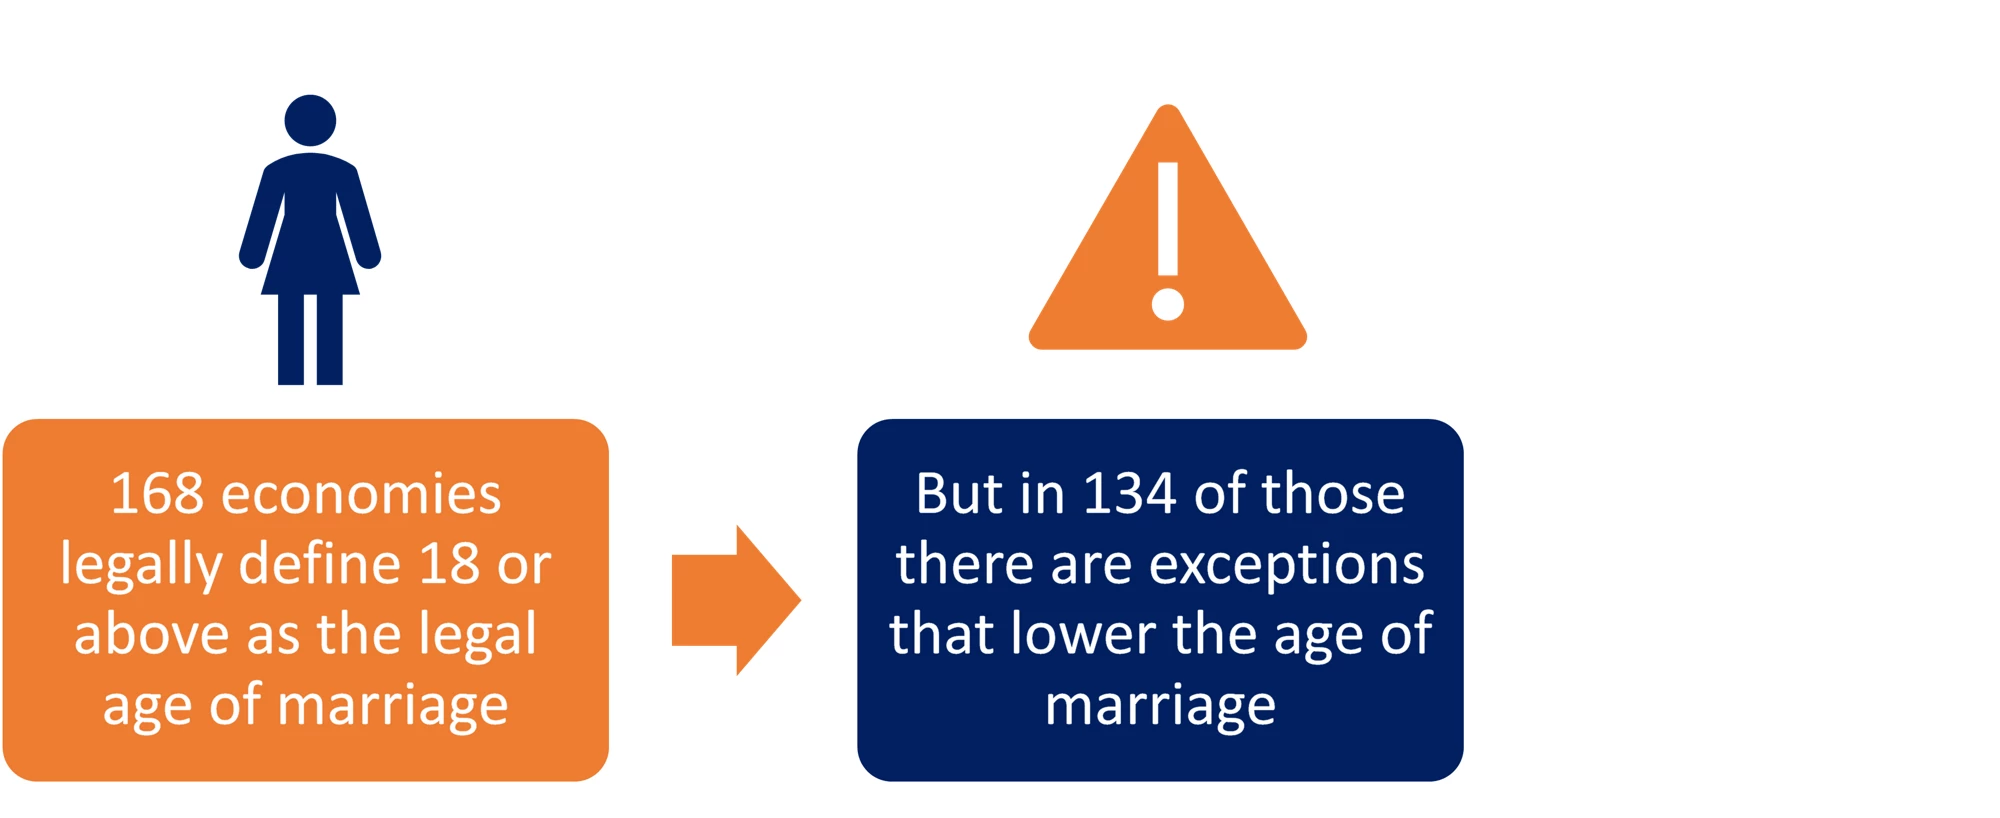 Graphic on how many economies have exceptions that lower the age of marriage